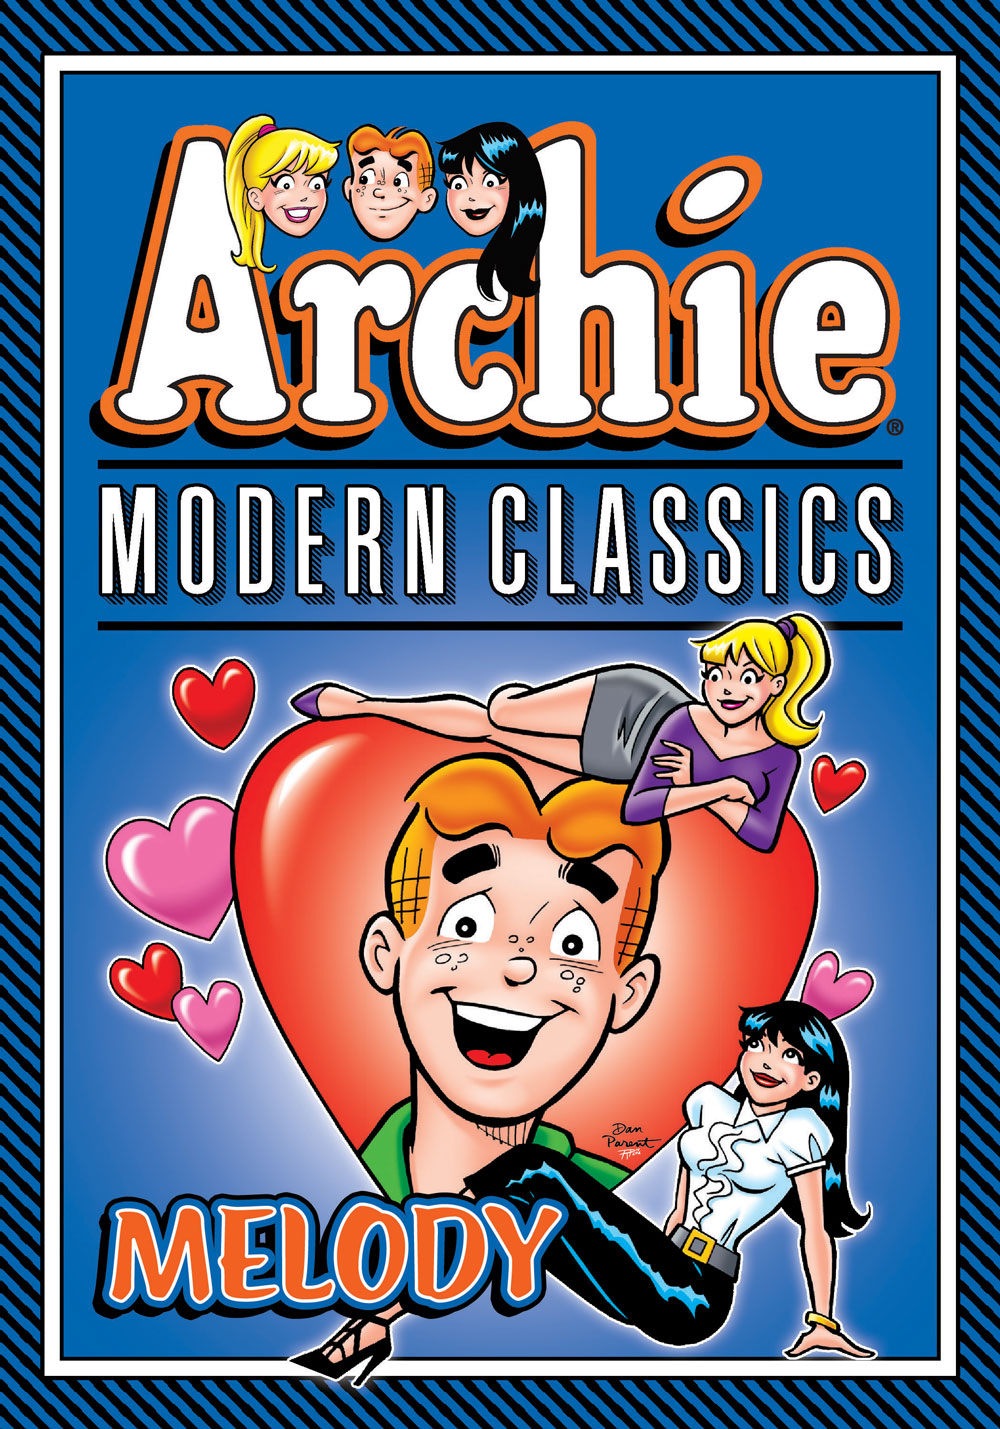 Archie is inside of a heart shape looking out at the reader. Betty lays across the top of the heart, while Veronica lays at the bottom of the image. They both look lovingly at Archie.